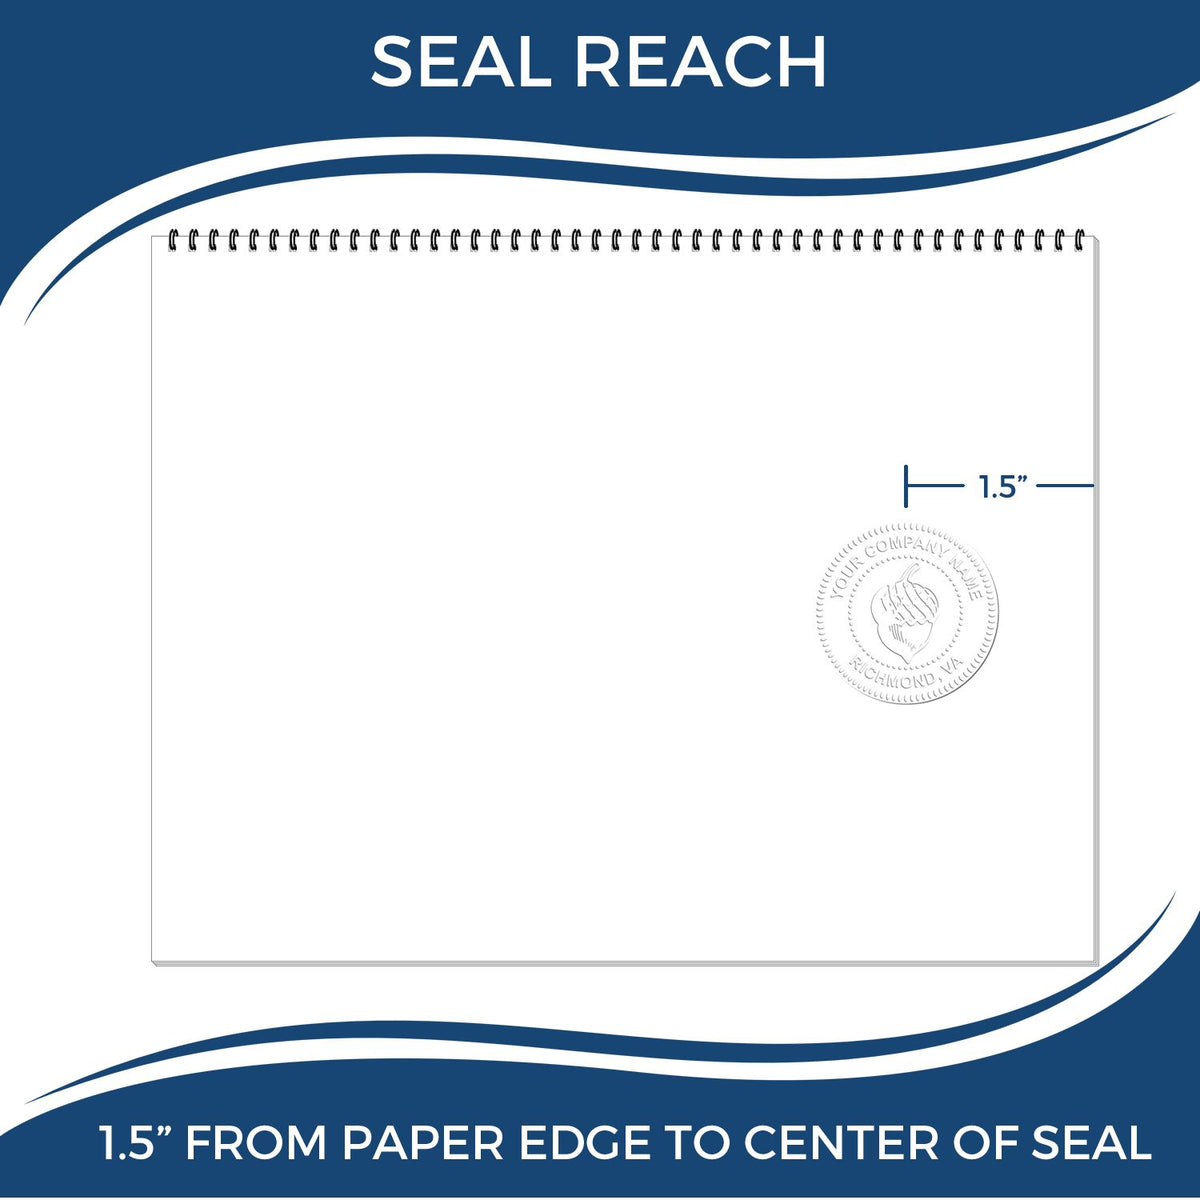 An infographic showing the seal reach which is represented by a ruler and a miniature seal image of the Nebraska Desk Surveyor Seal Embosser